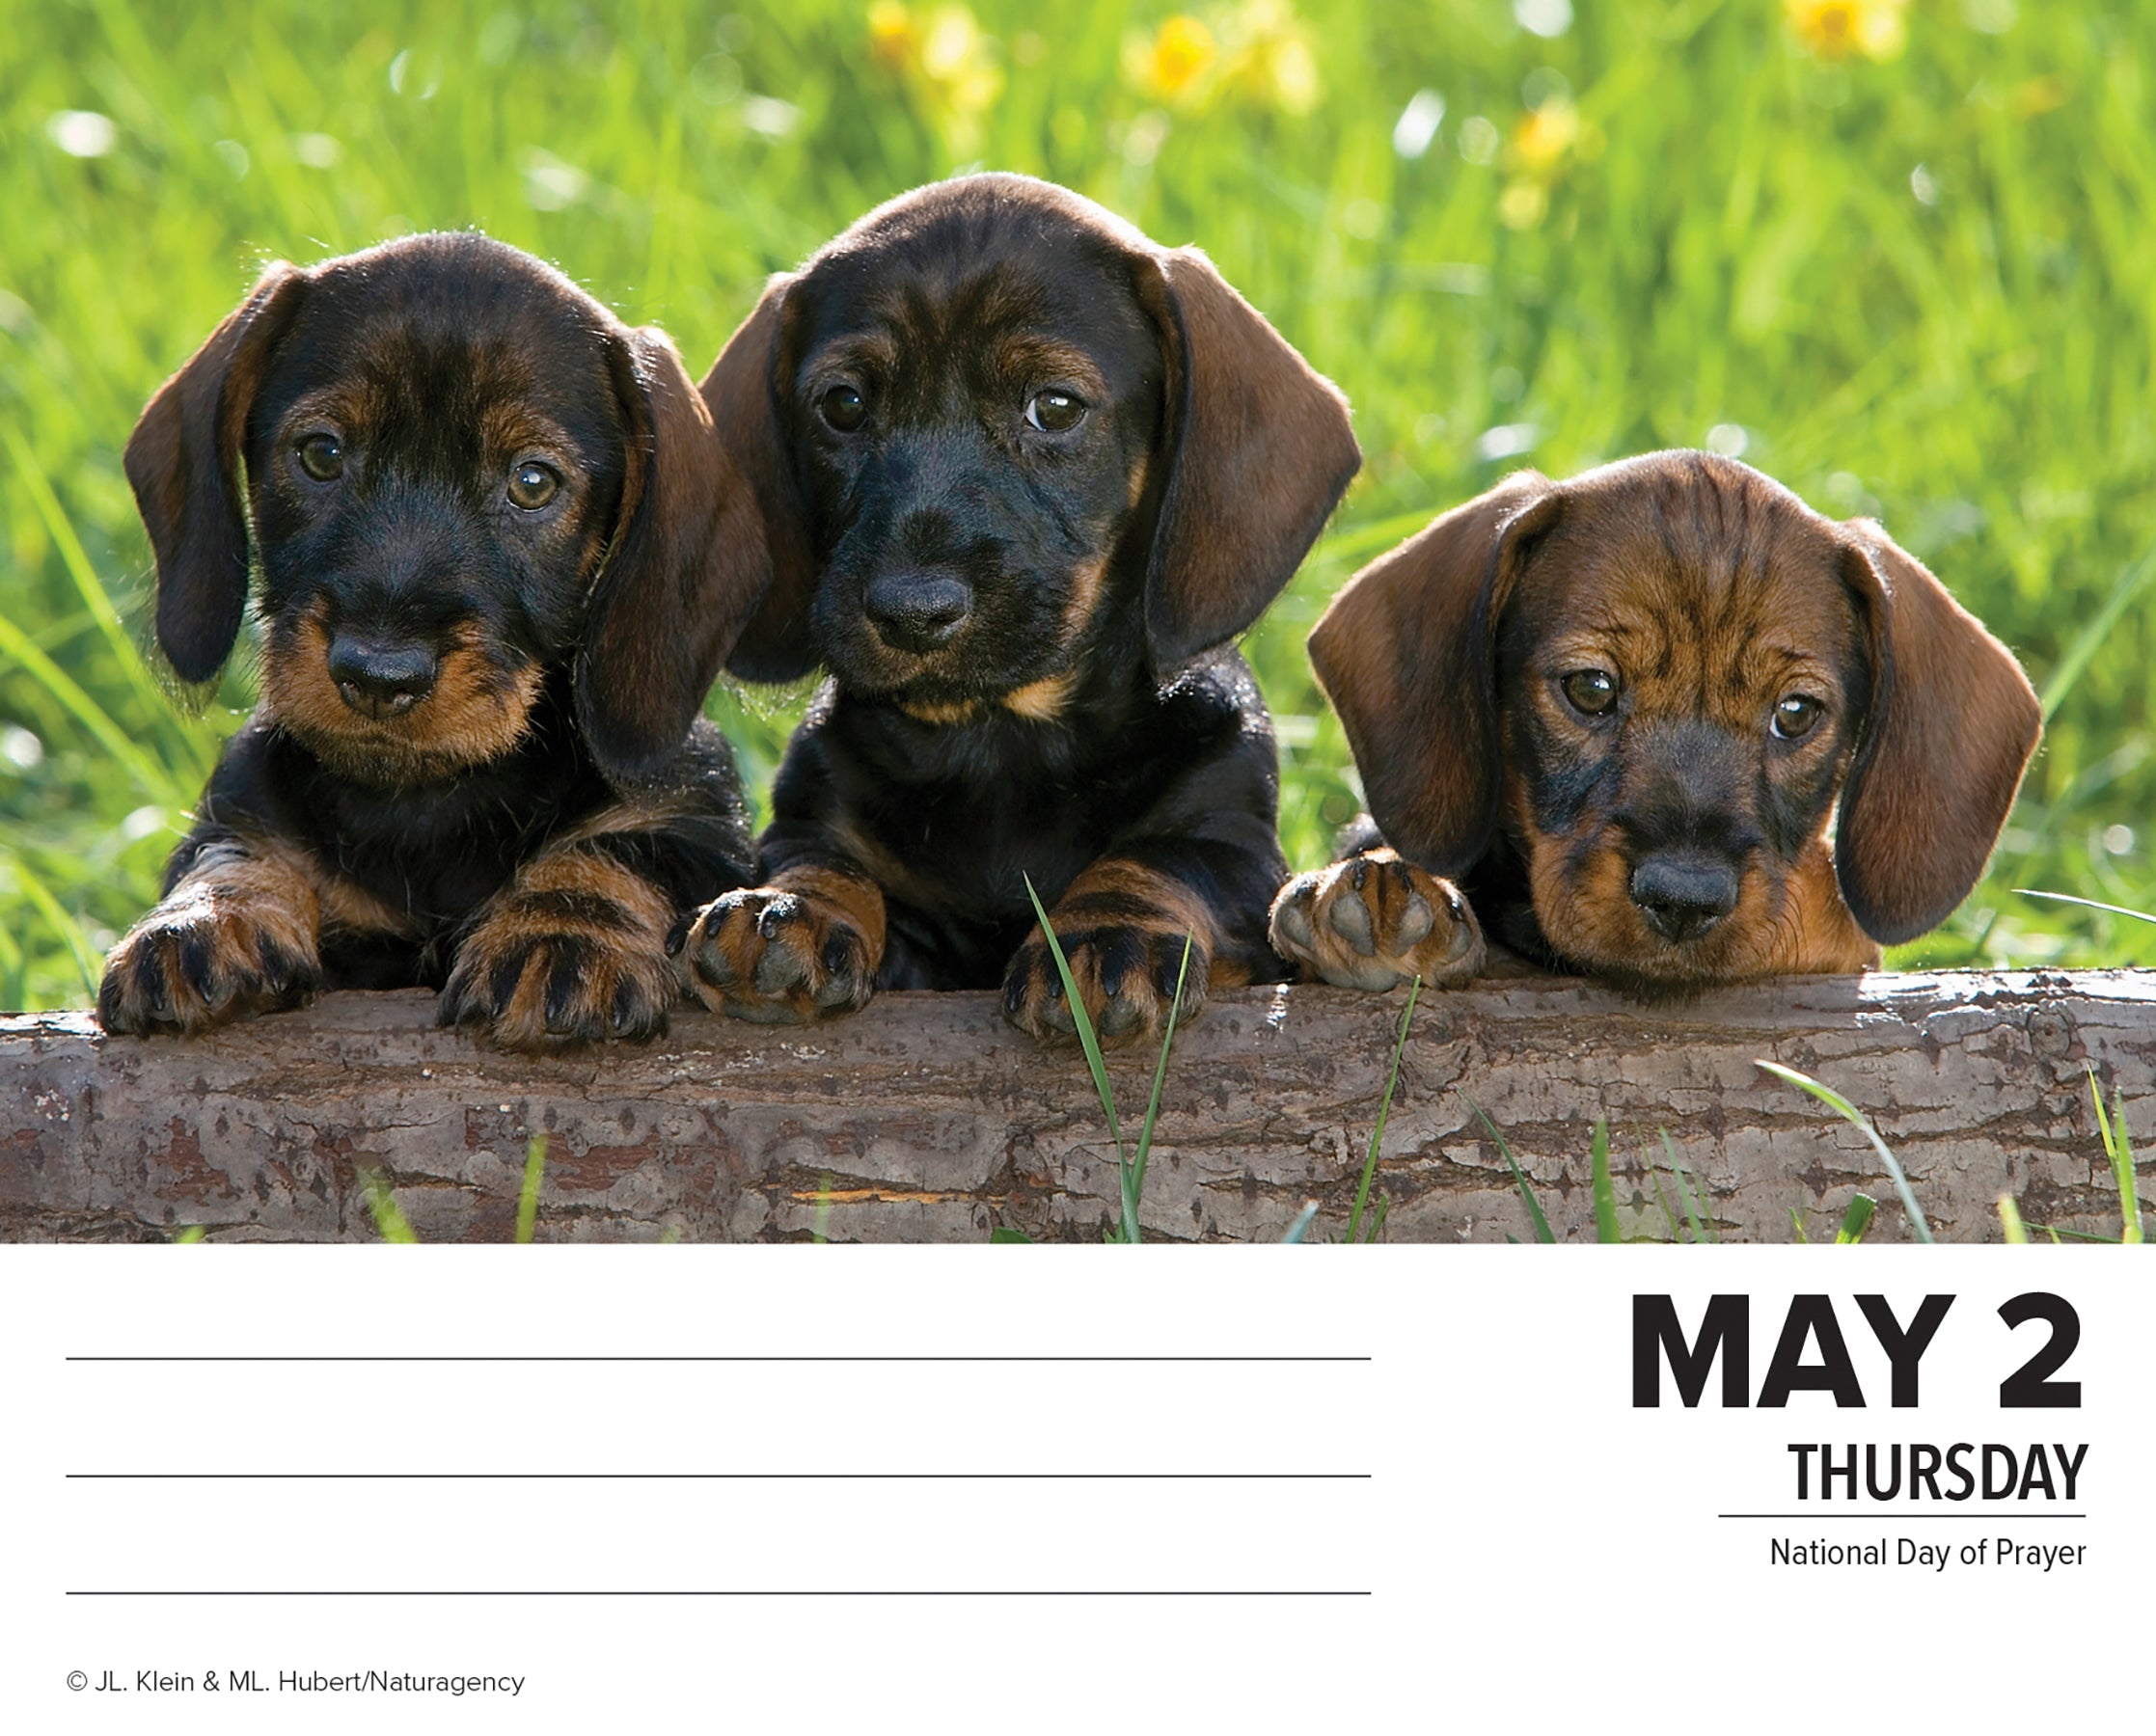 2024 Dachshunds - Boxed Page A Day Calendar